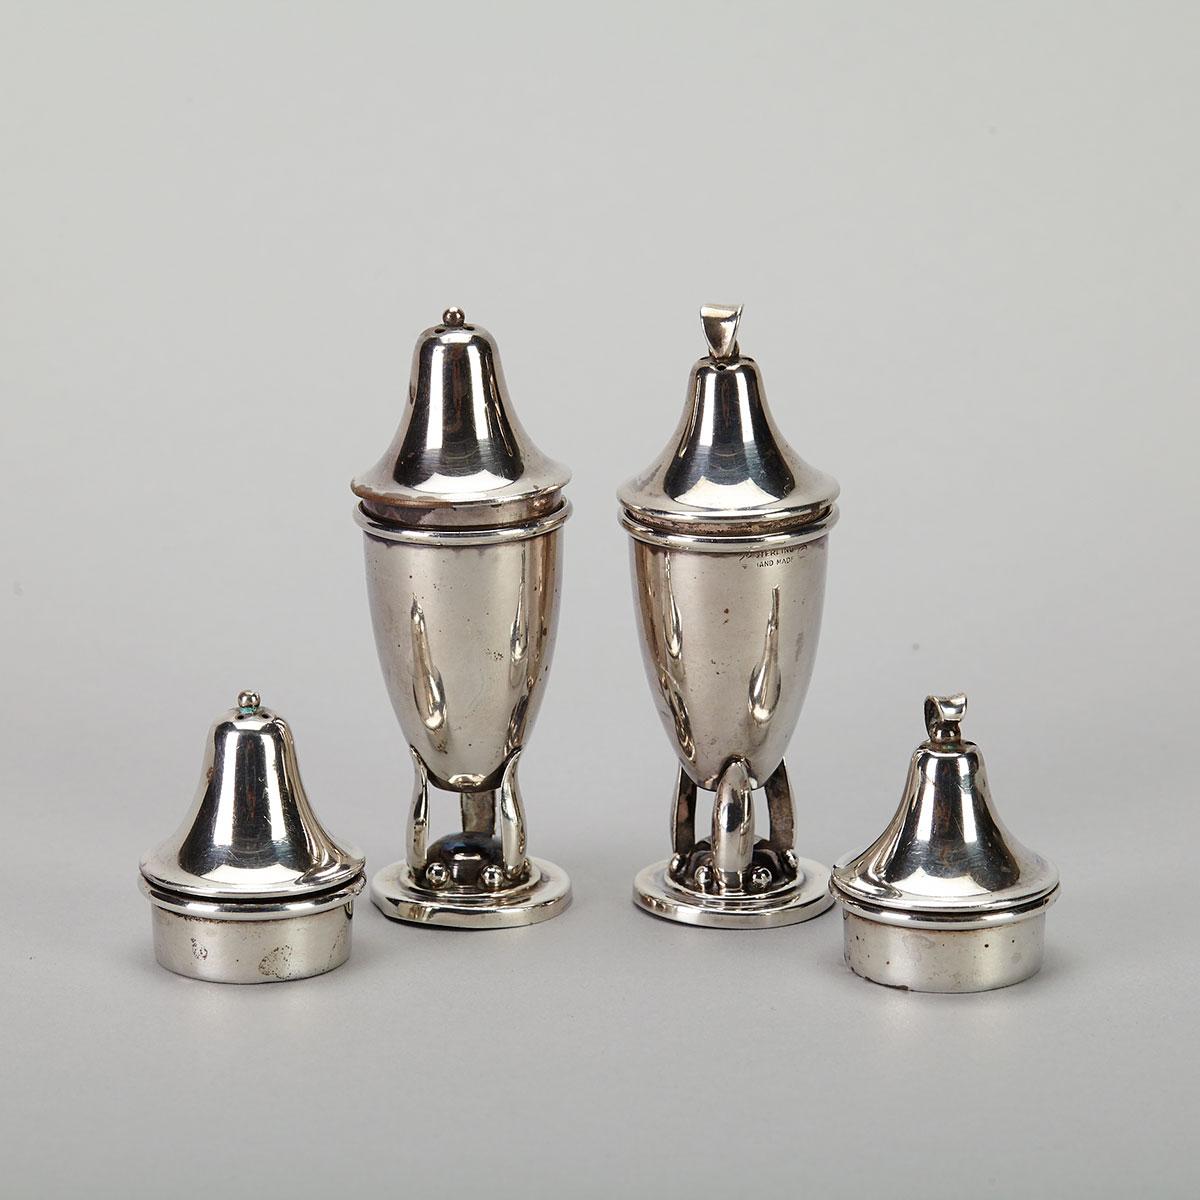 Two Pairs of Canadian Silver Salt and Pepper Casters, Carl Poul Petersen, Montreal, Que., mid-20th century